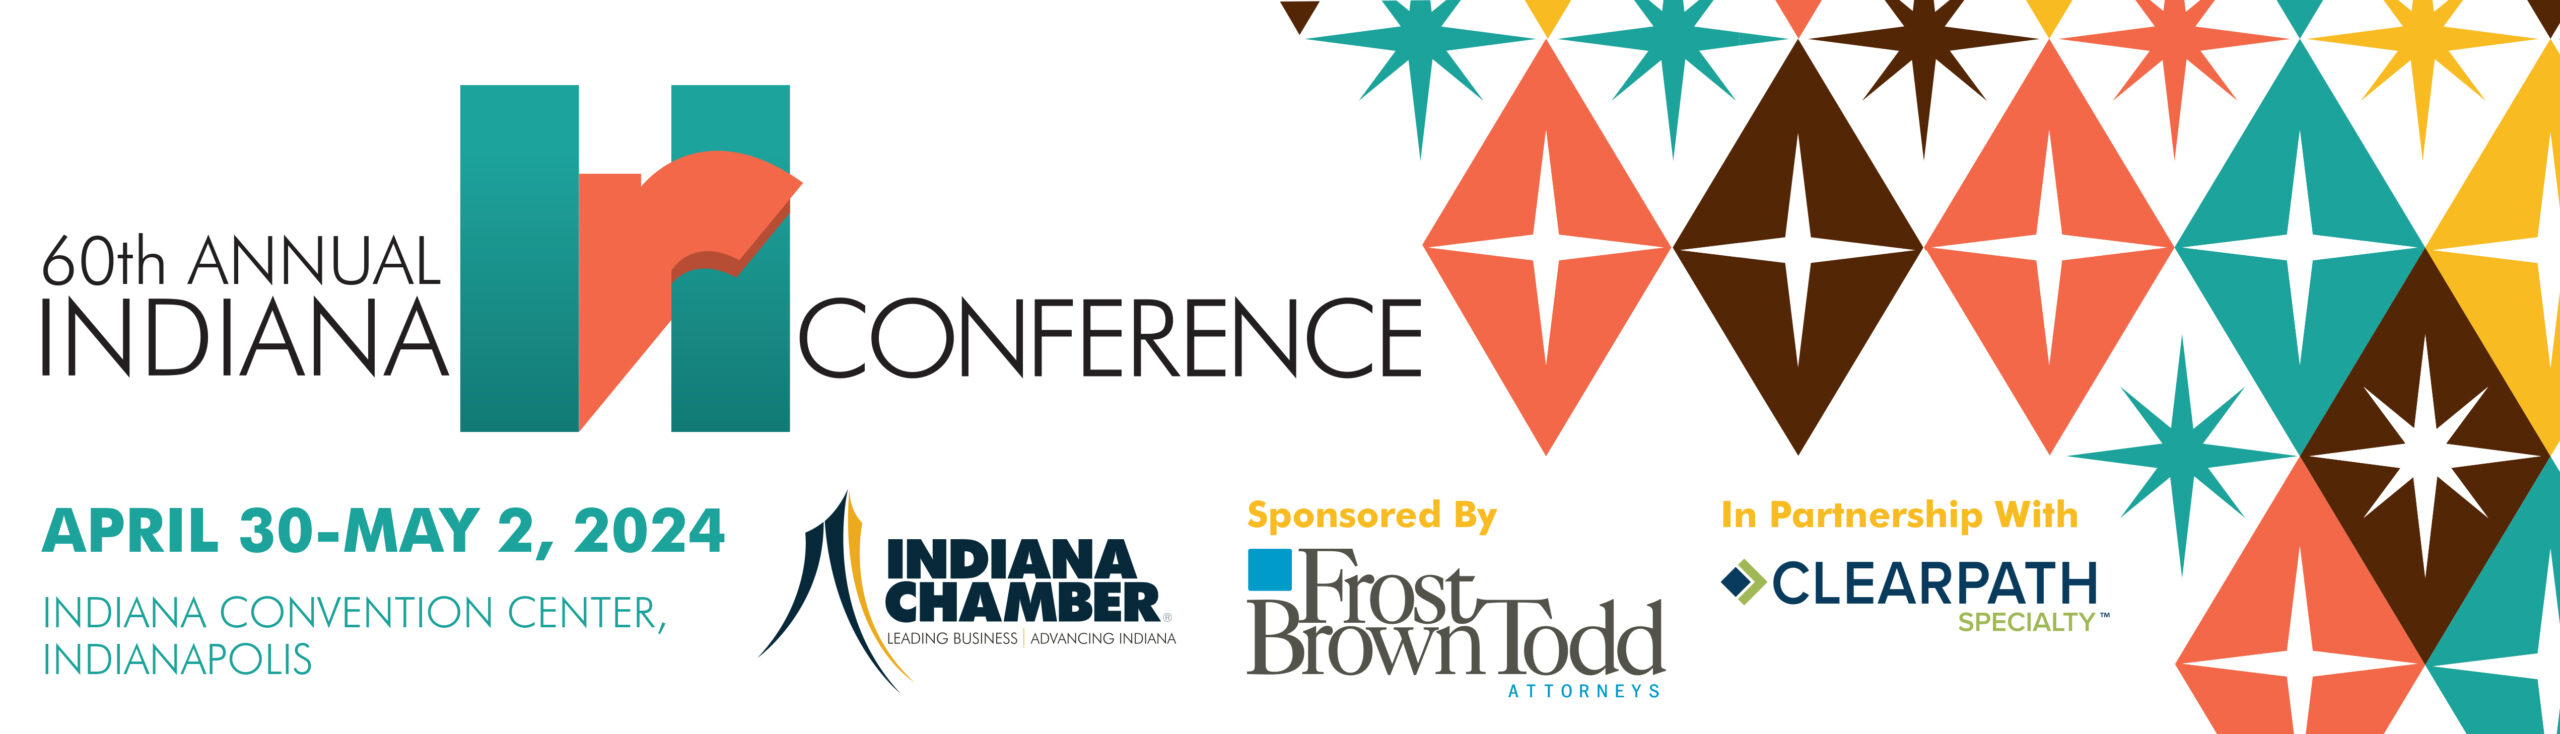 Human Resources Conference & Expo Logo